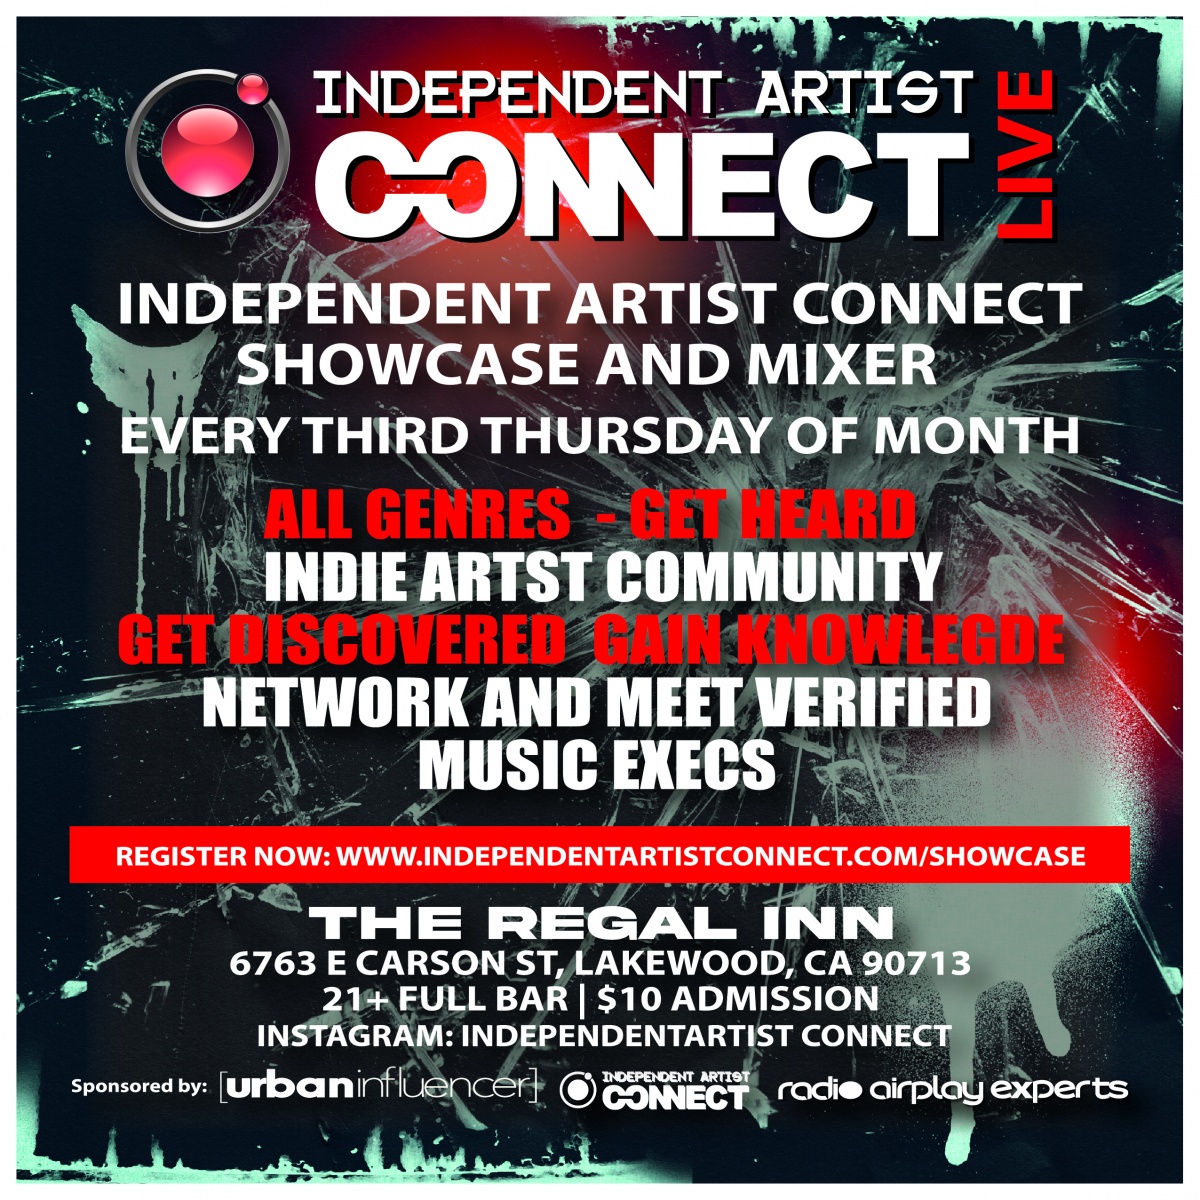 Event: INDEPENDENT ARTIST CONNECT SHOWCASE